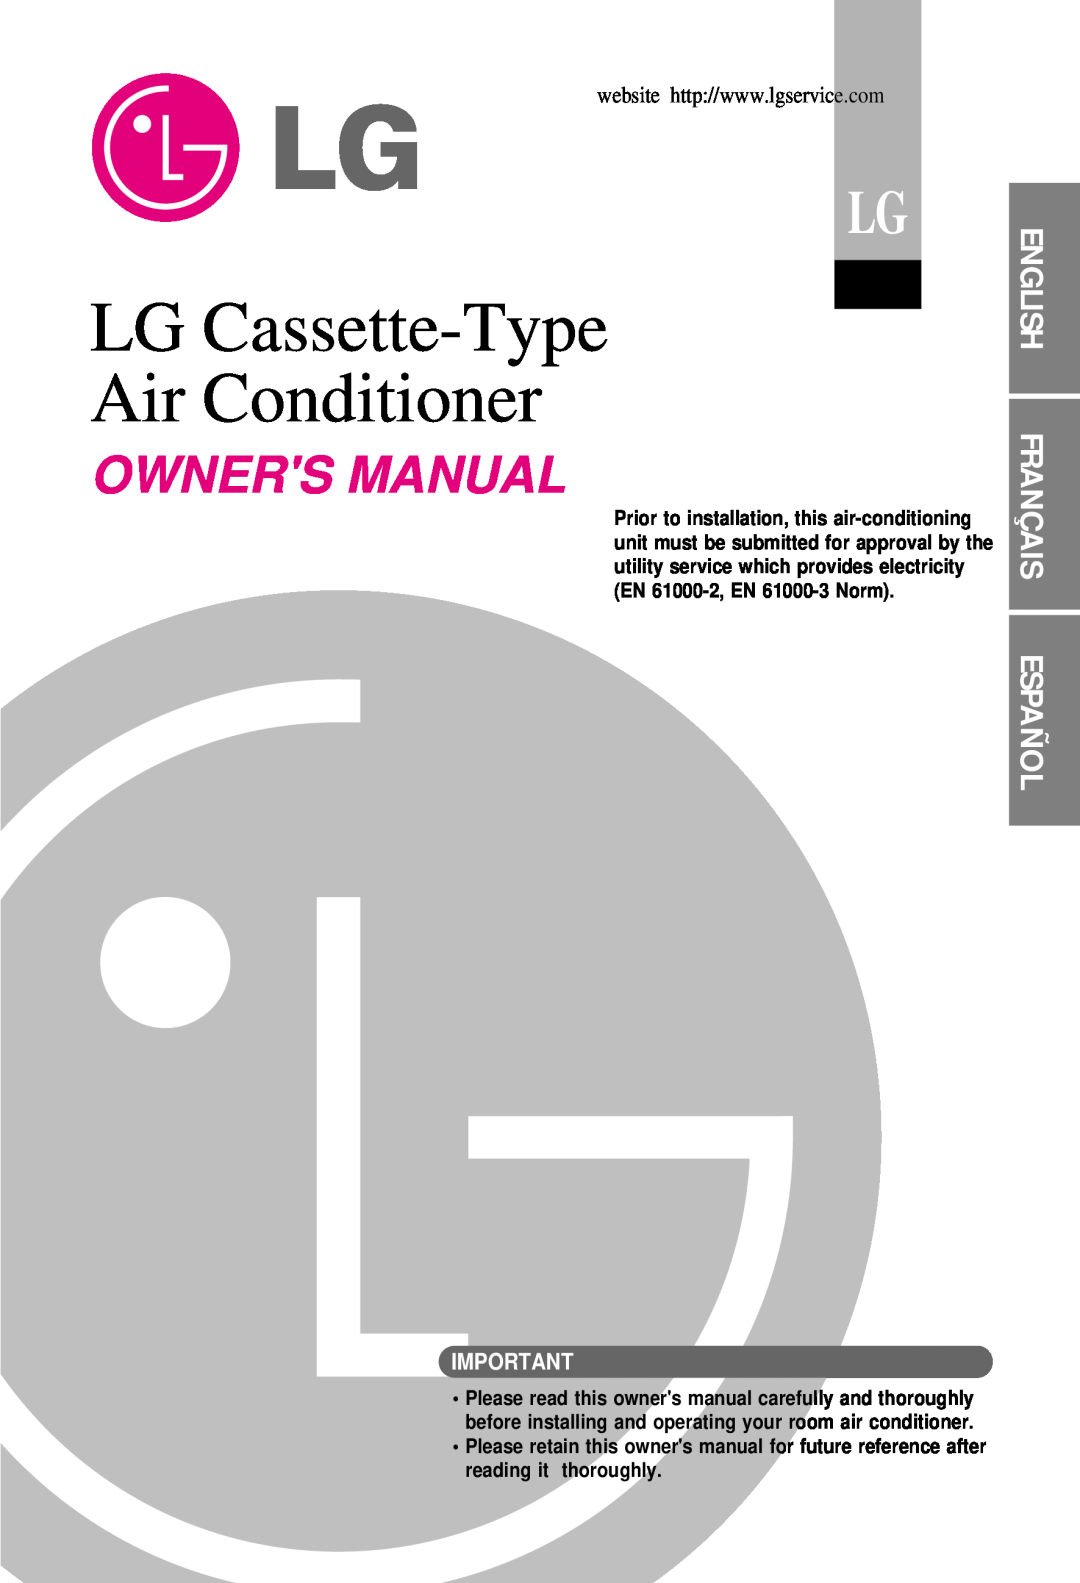 LG Electronics 3828A22005P owner manual English Français Español, LG Cassette-Type Air Conditioner, Owners Manual 